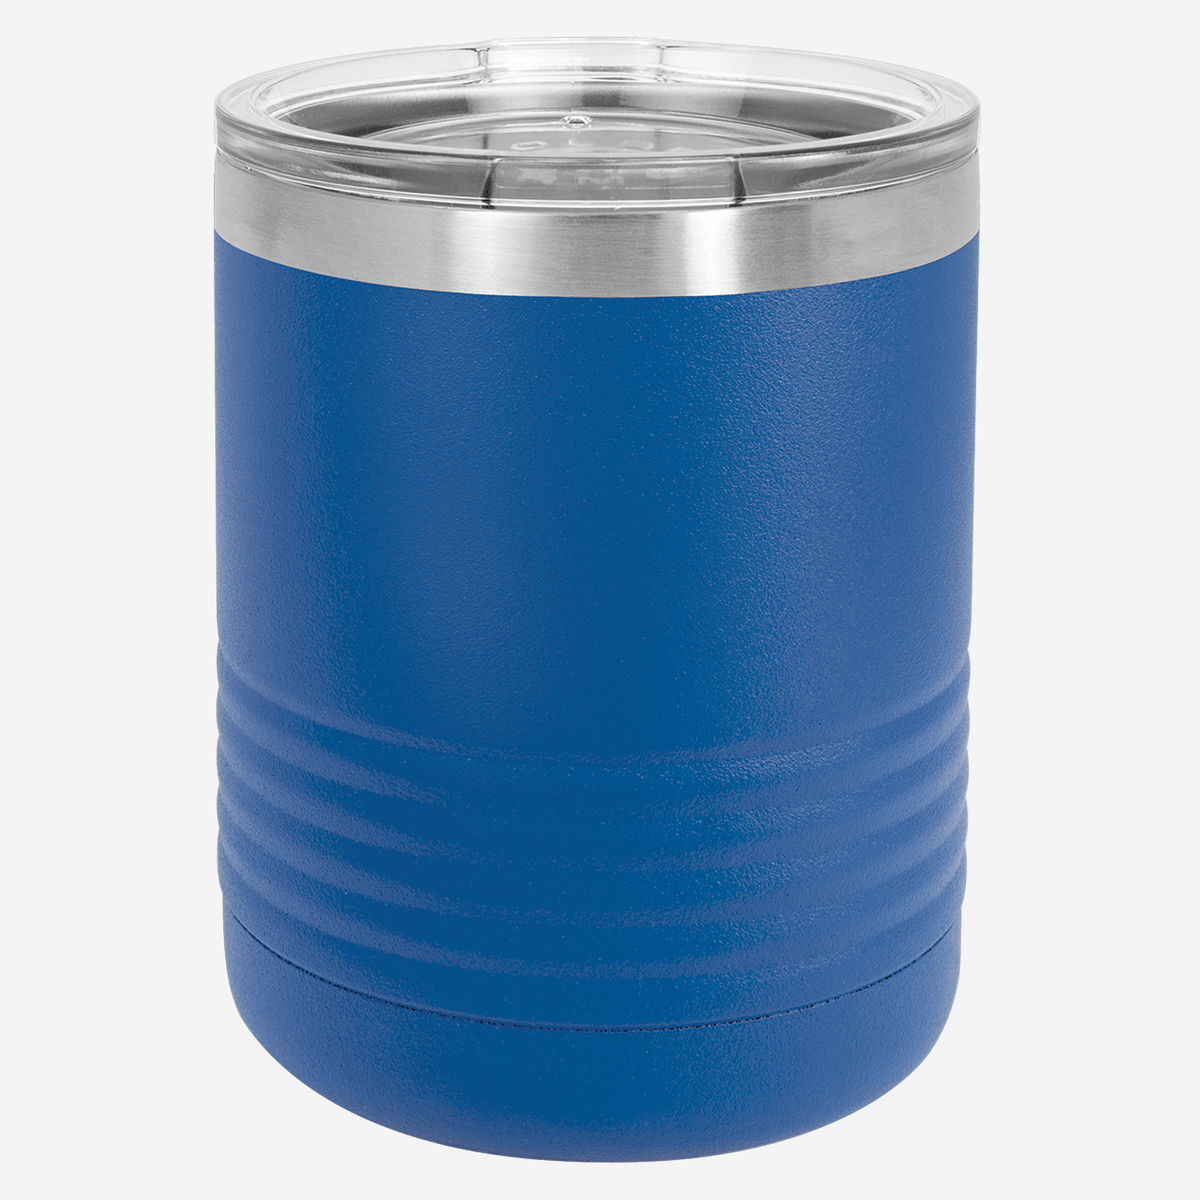 10 oz royal blue tumbler with lid grip rings on the bottom